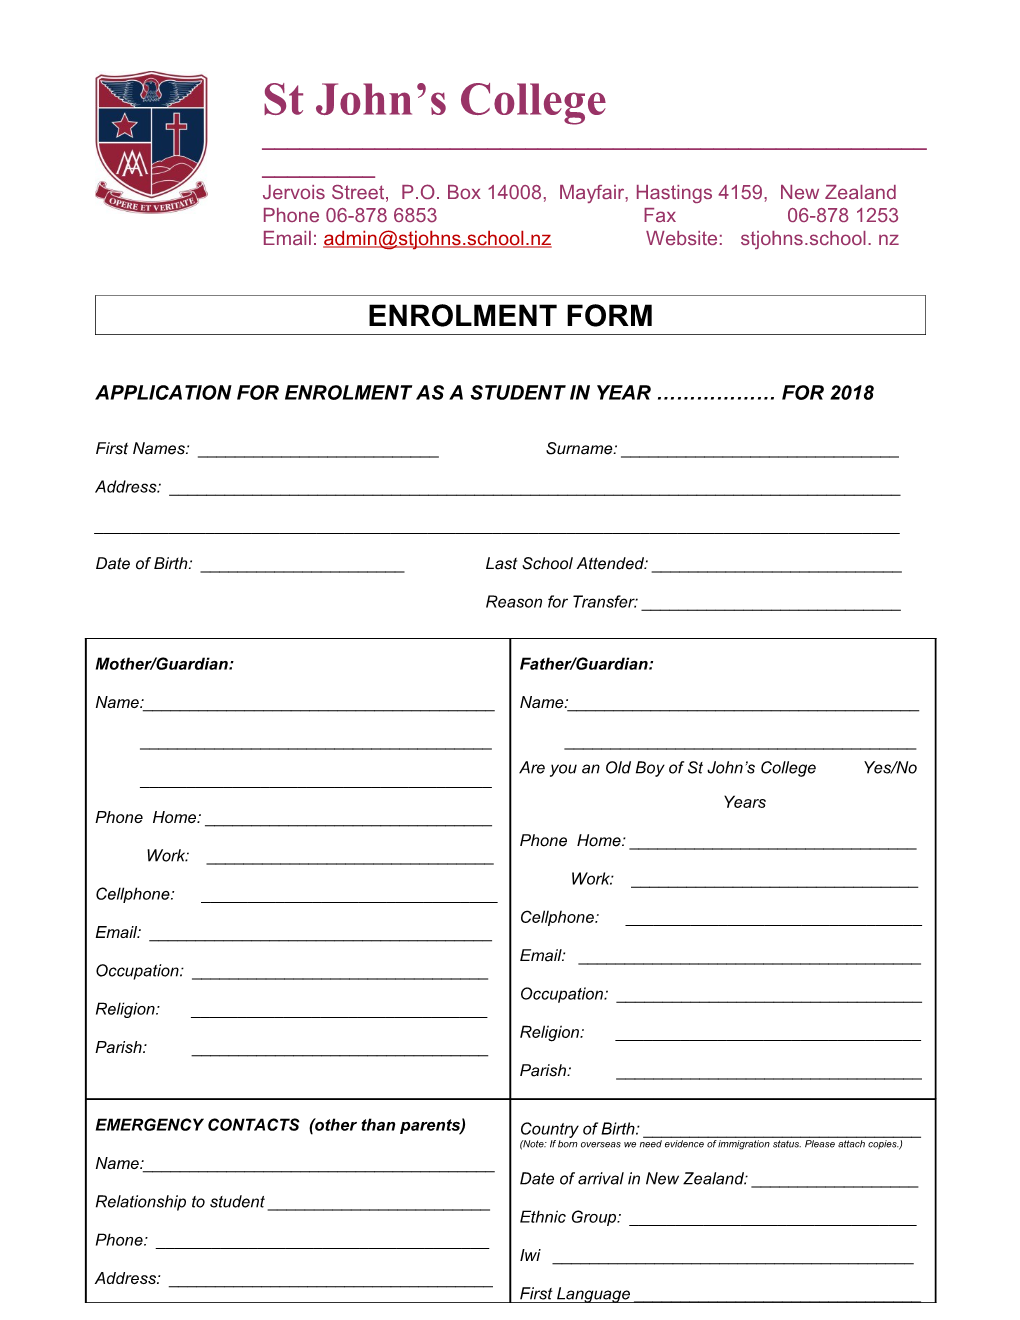 Application for Enrolment As a Student in Year for 2018